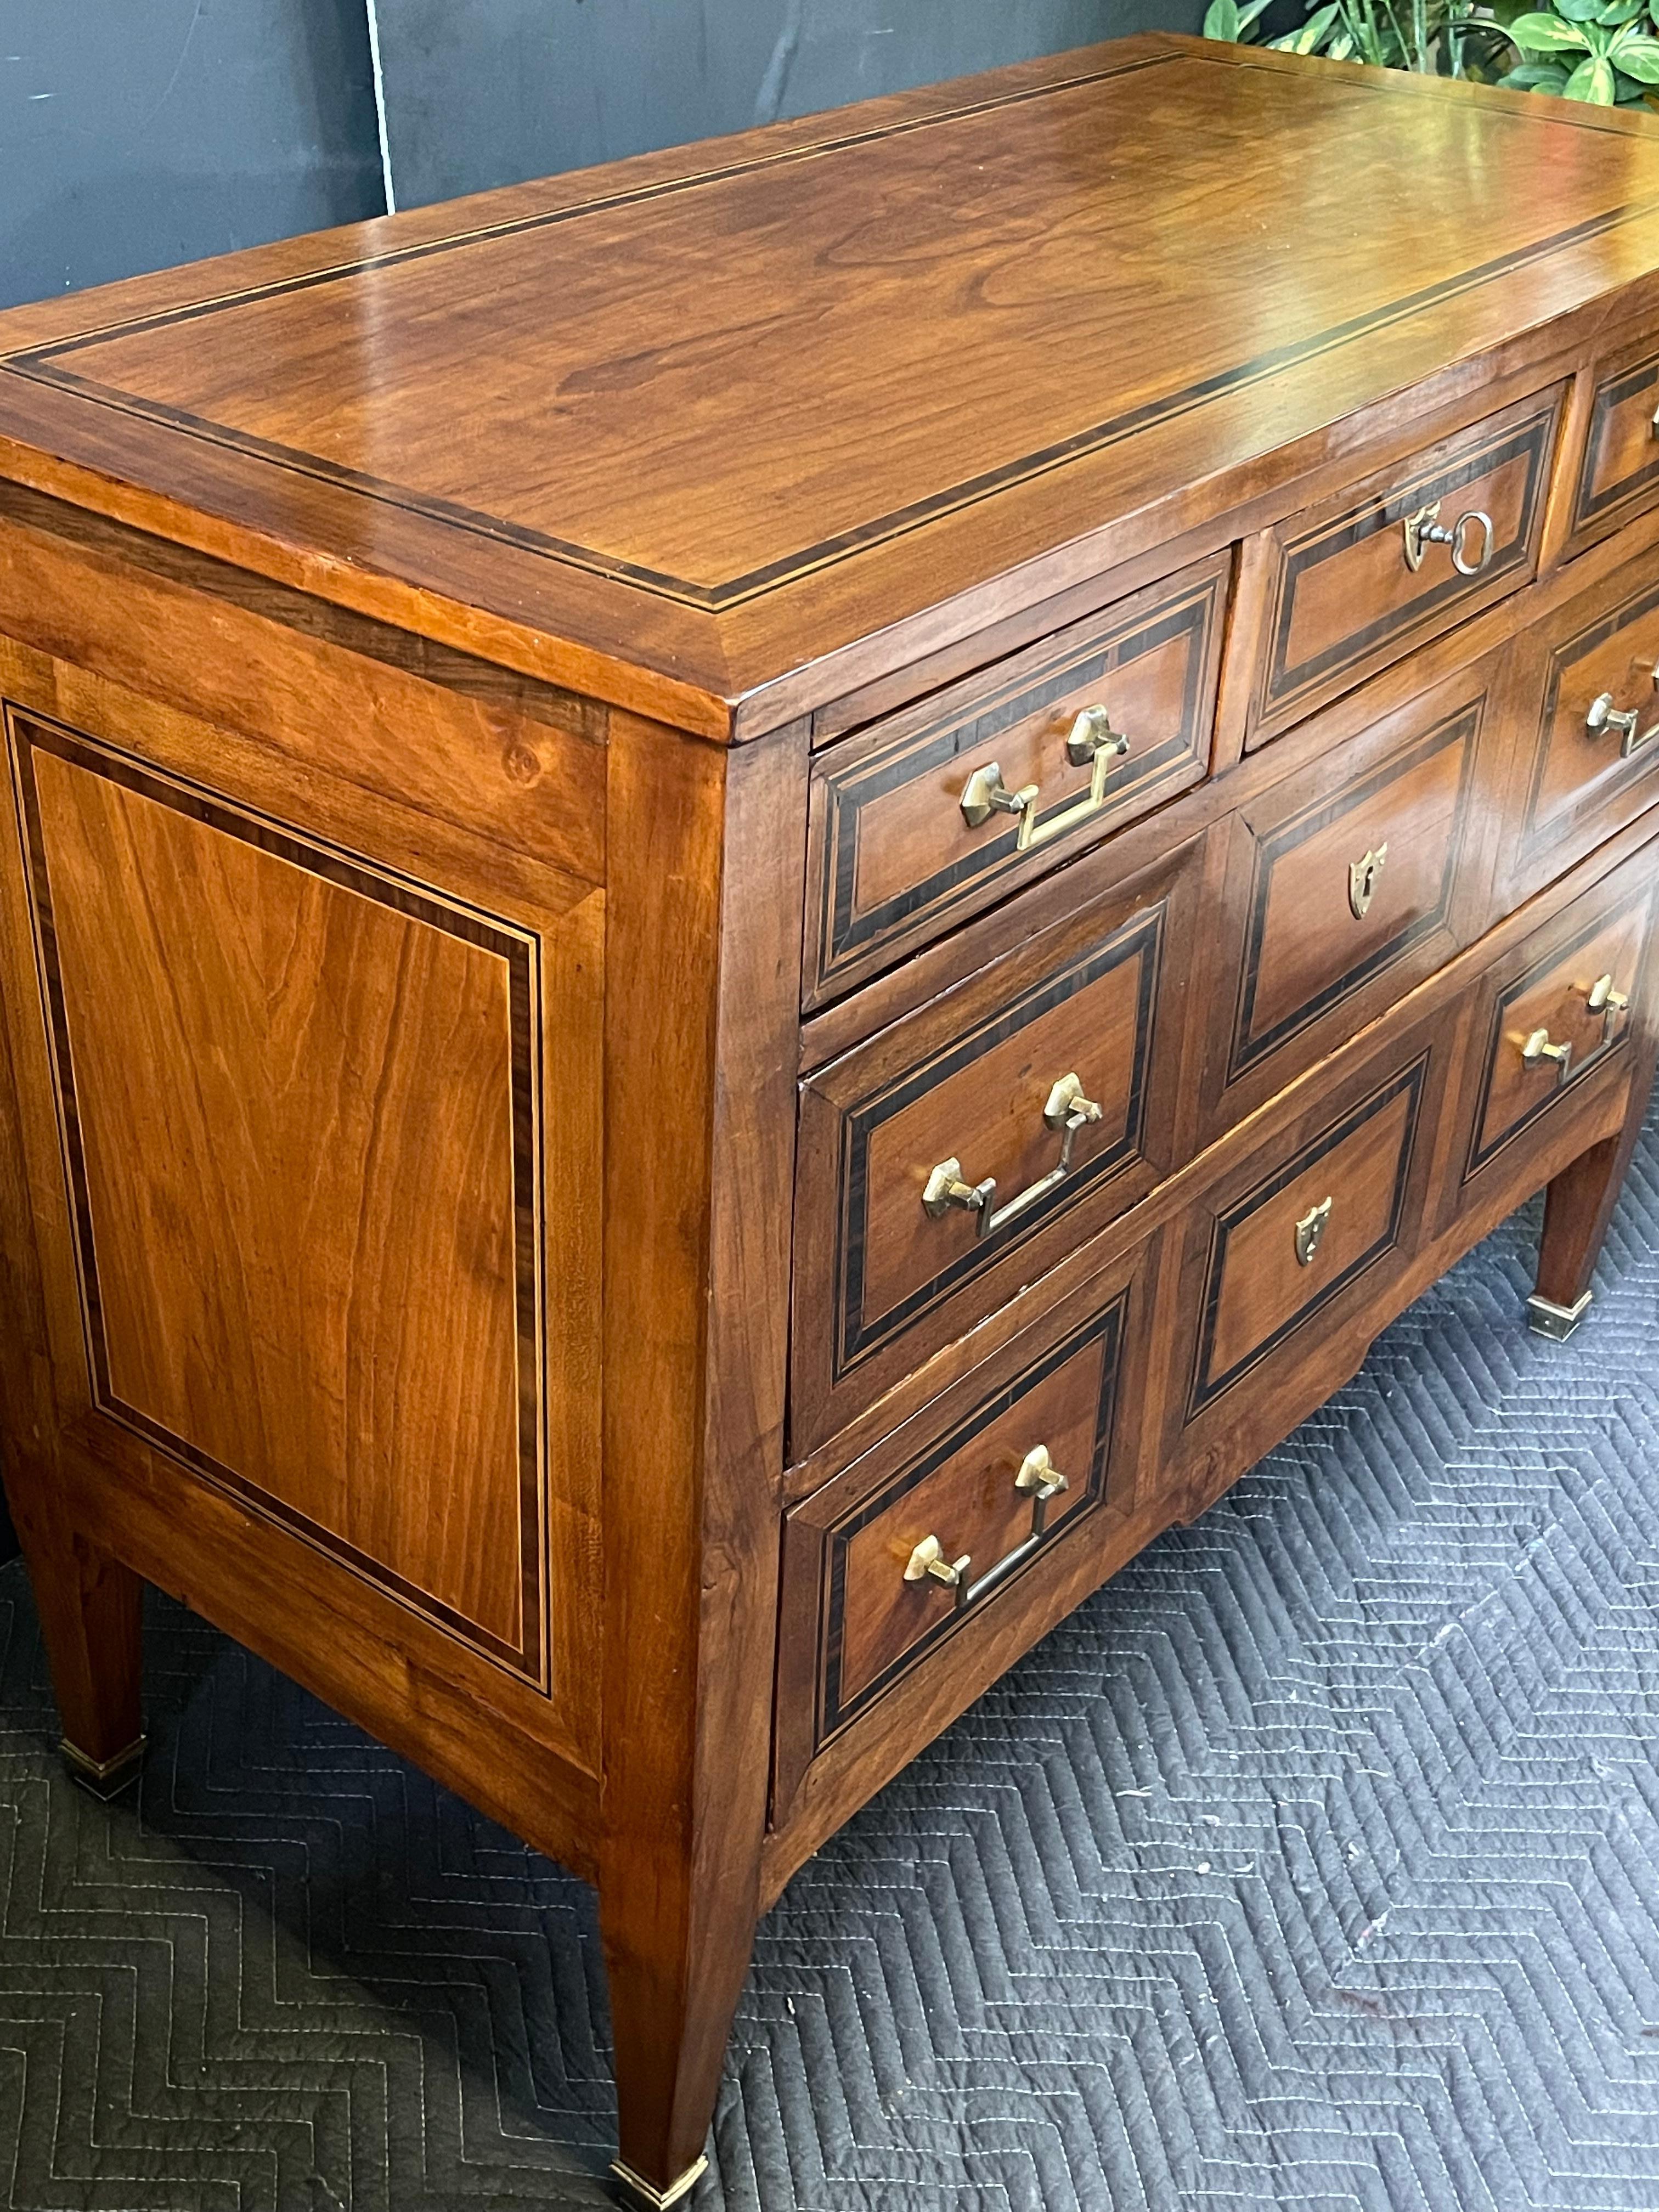 19th Century Italian Neoclassical five drawer chest or commode styled in the manner of Directoire. The burled wood top and paneled sides have a beautifully detailed inset inlay surrounded by a banded outer edge. A solid and symmetrically designed